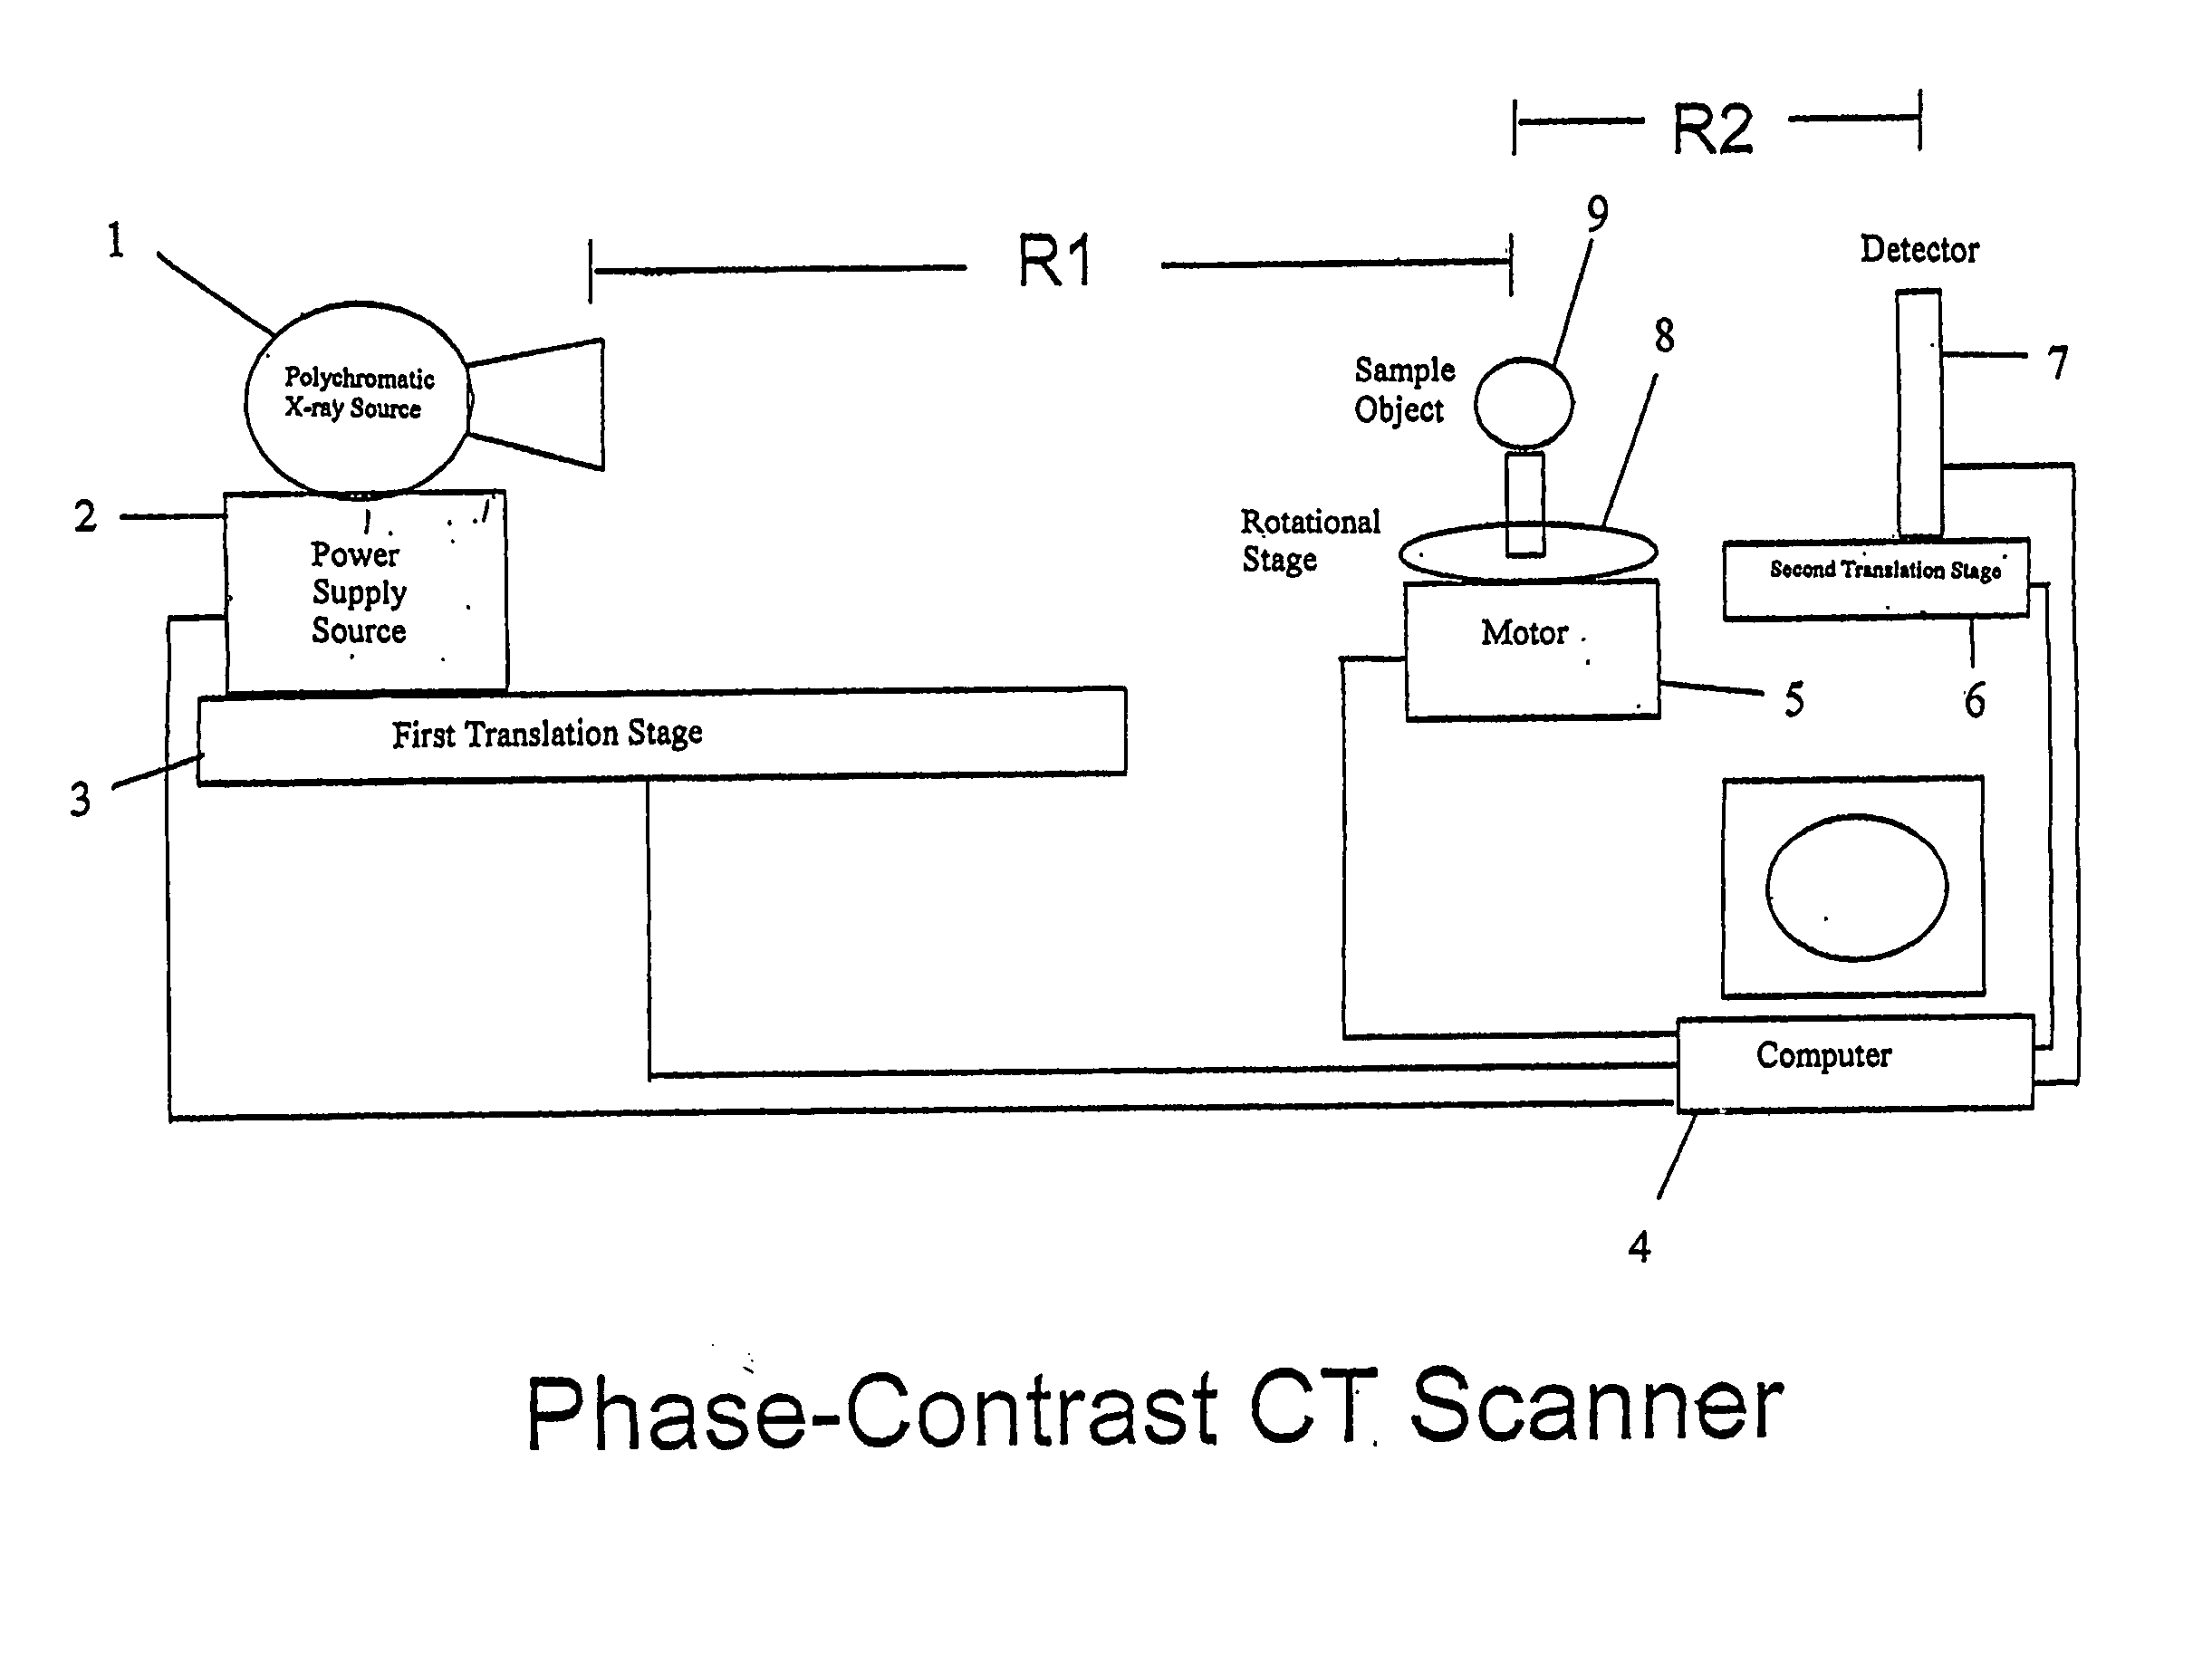 Phase-contrast enhanced computed tomography